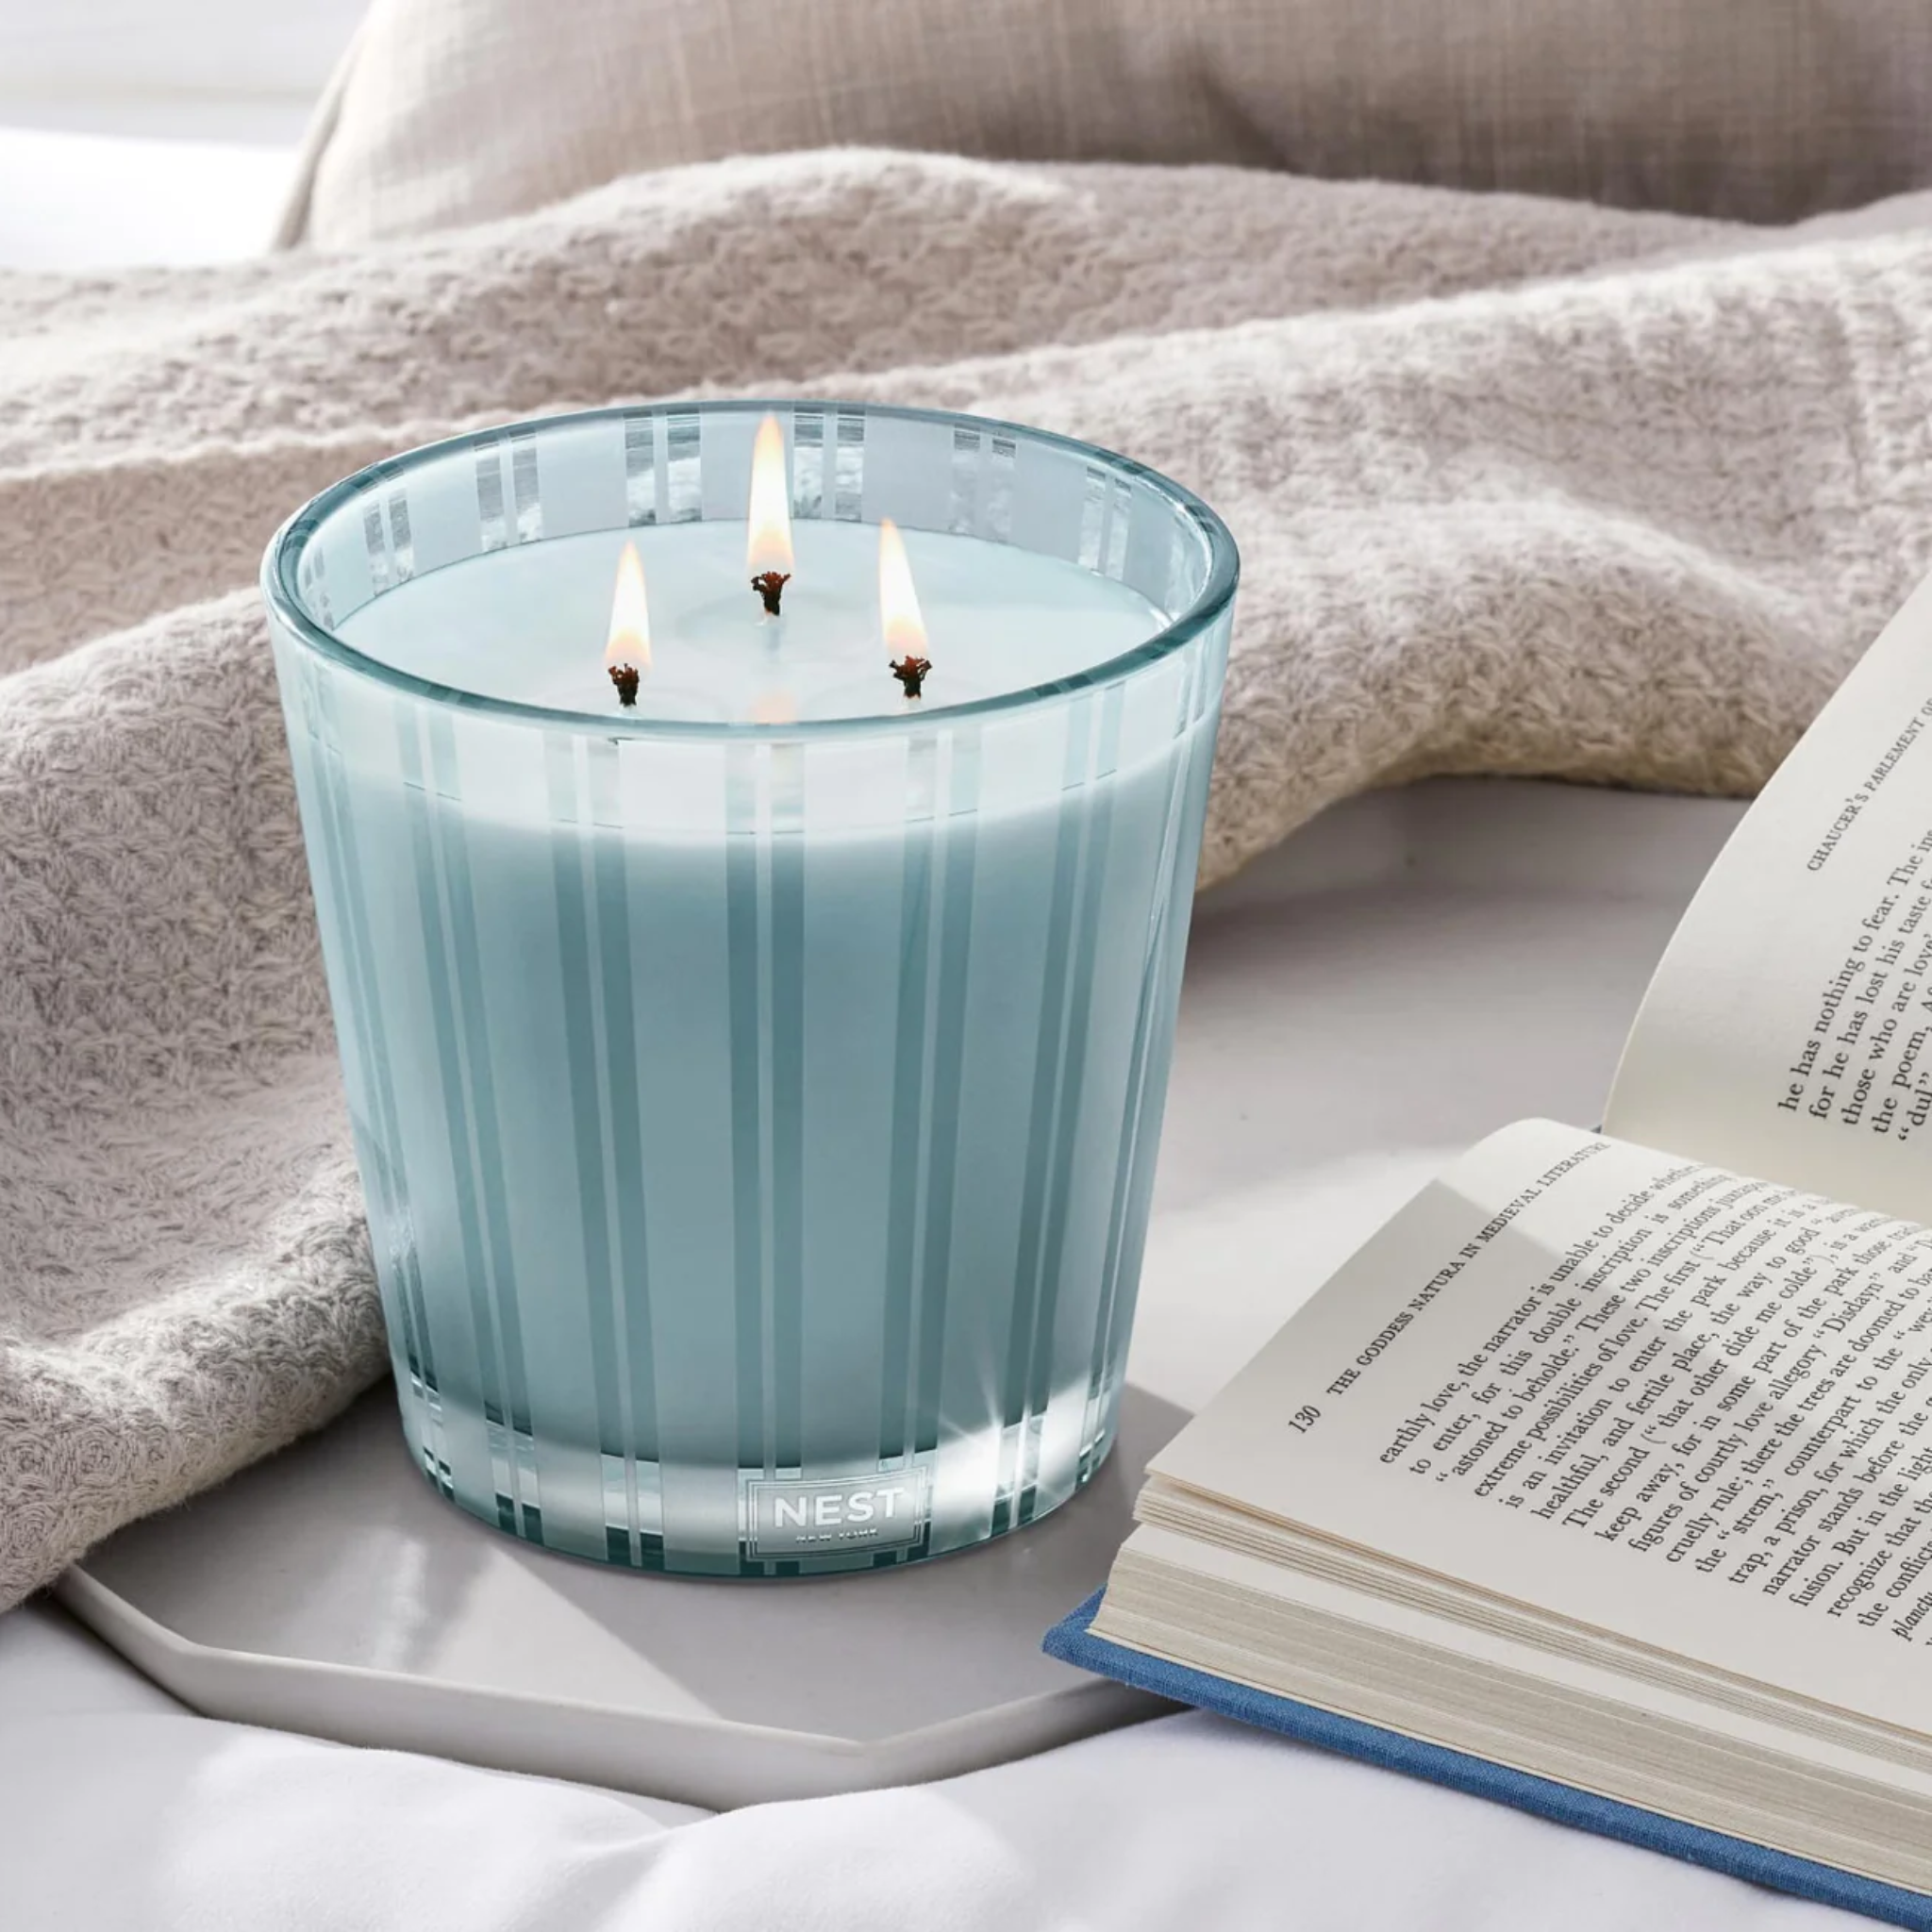 3-Wick Candles – Trapp Fragrances